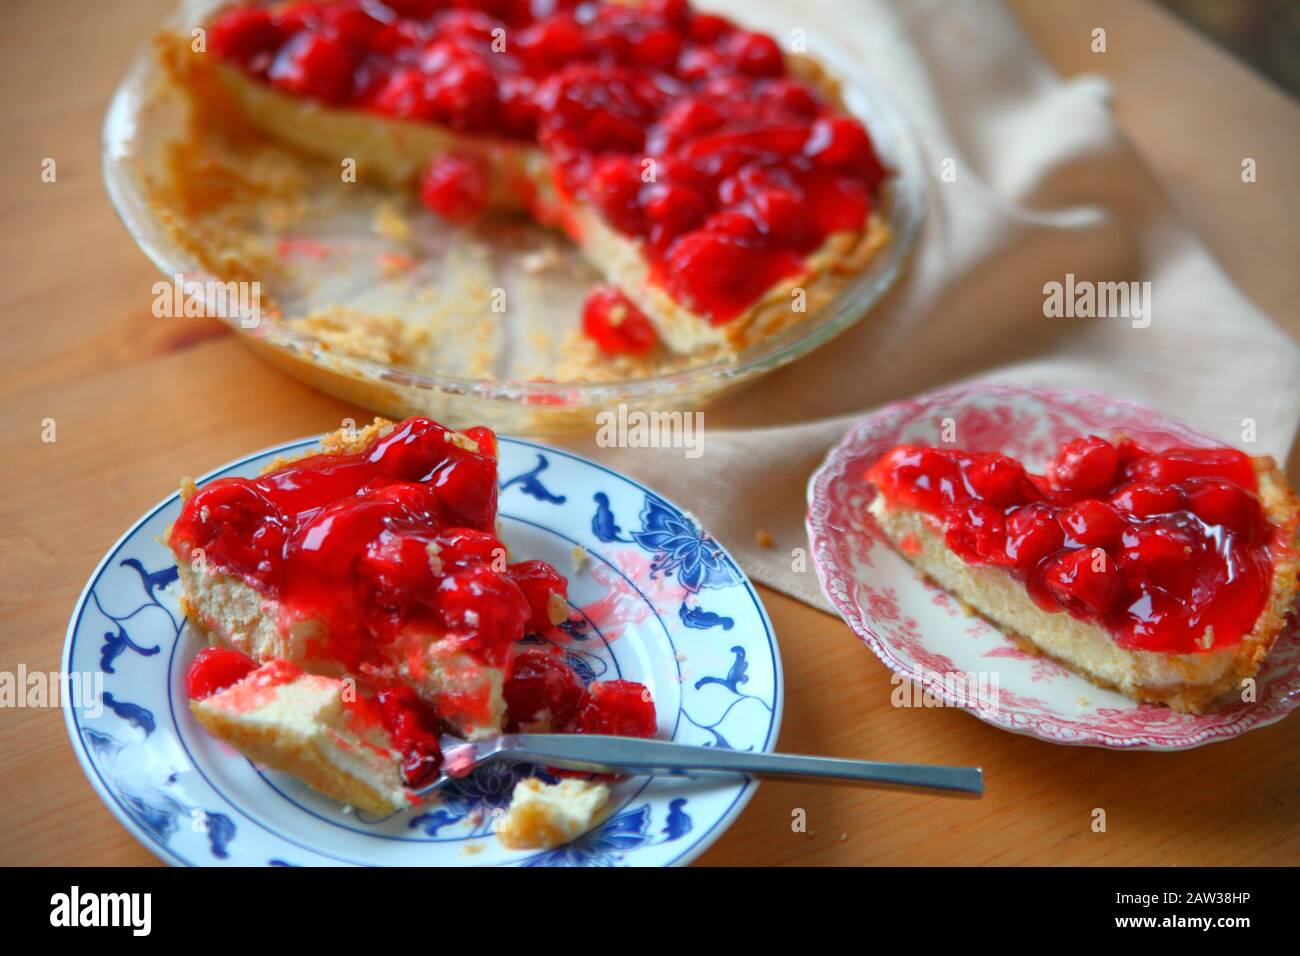 A cherry cream cheese pie served on decorative dishes Stock Photo